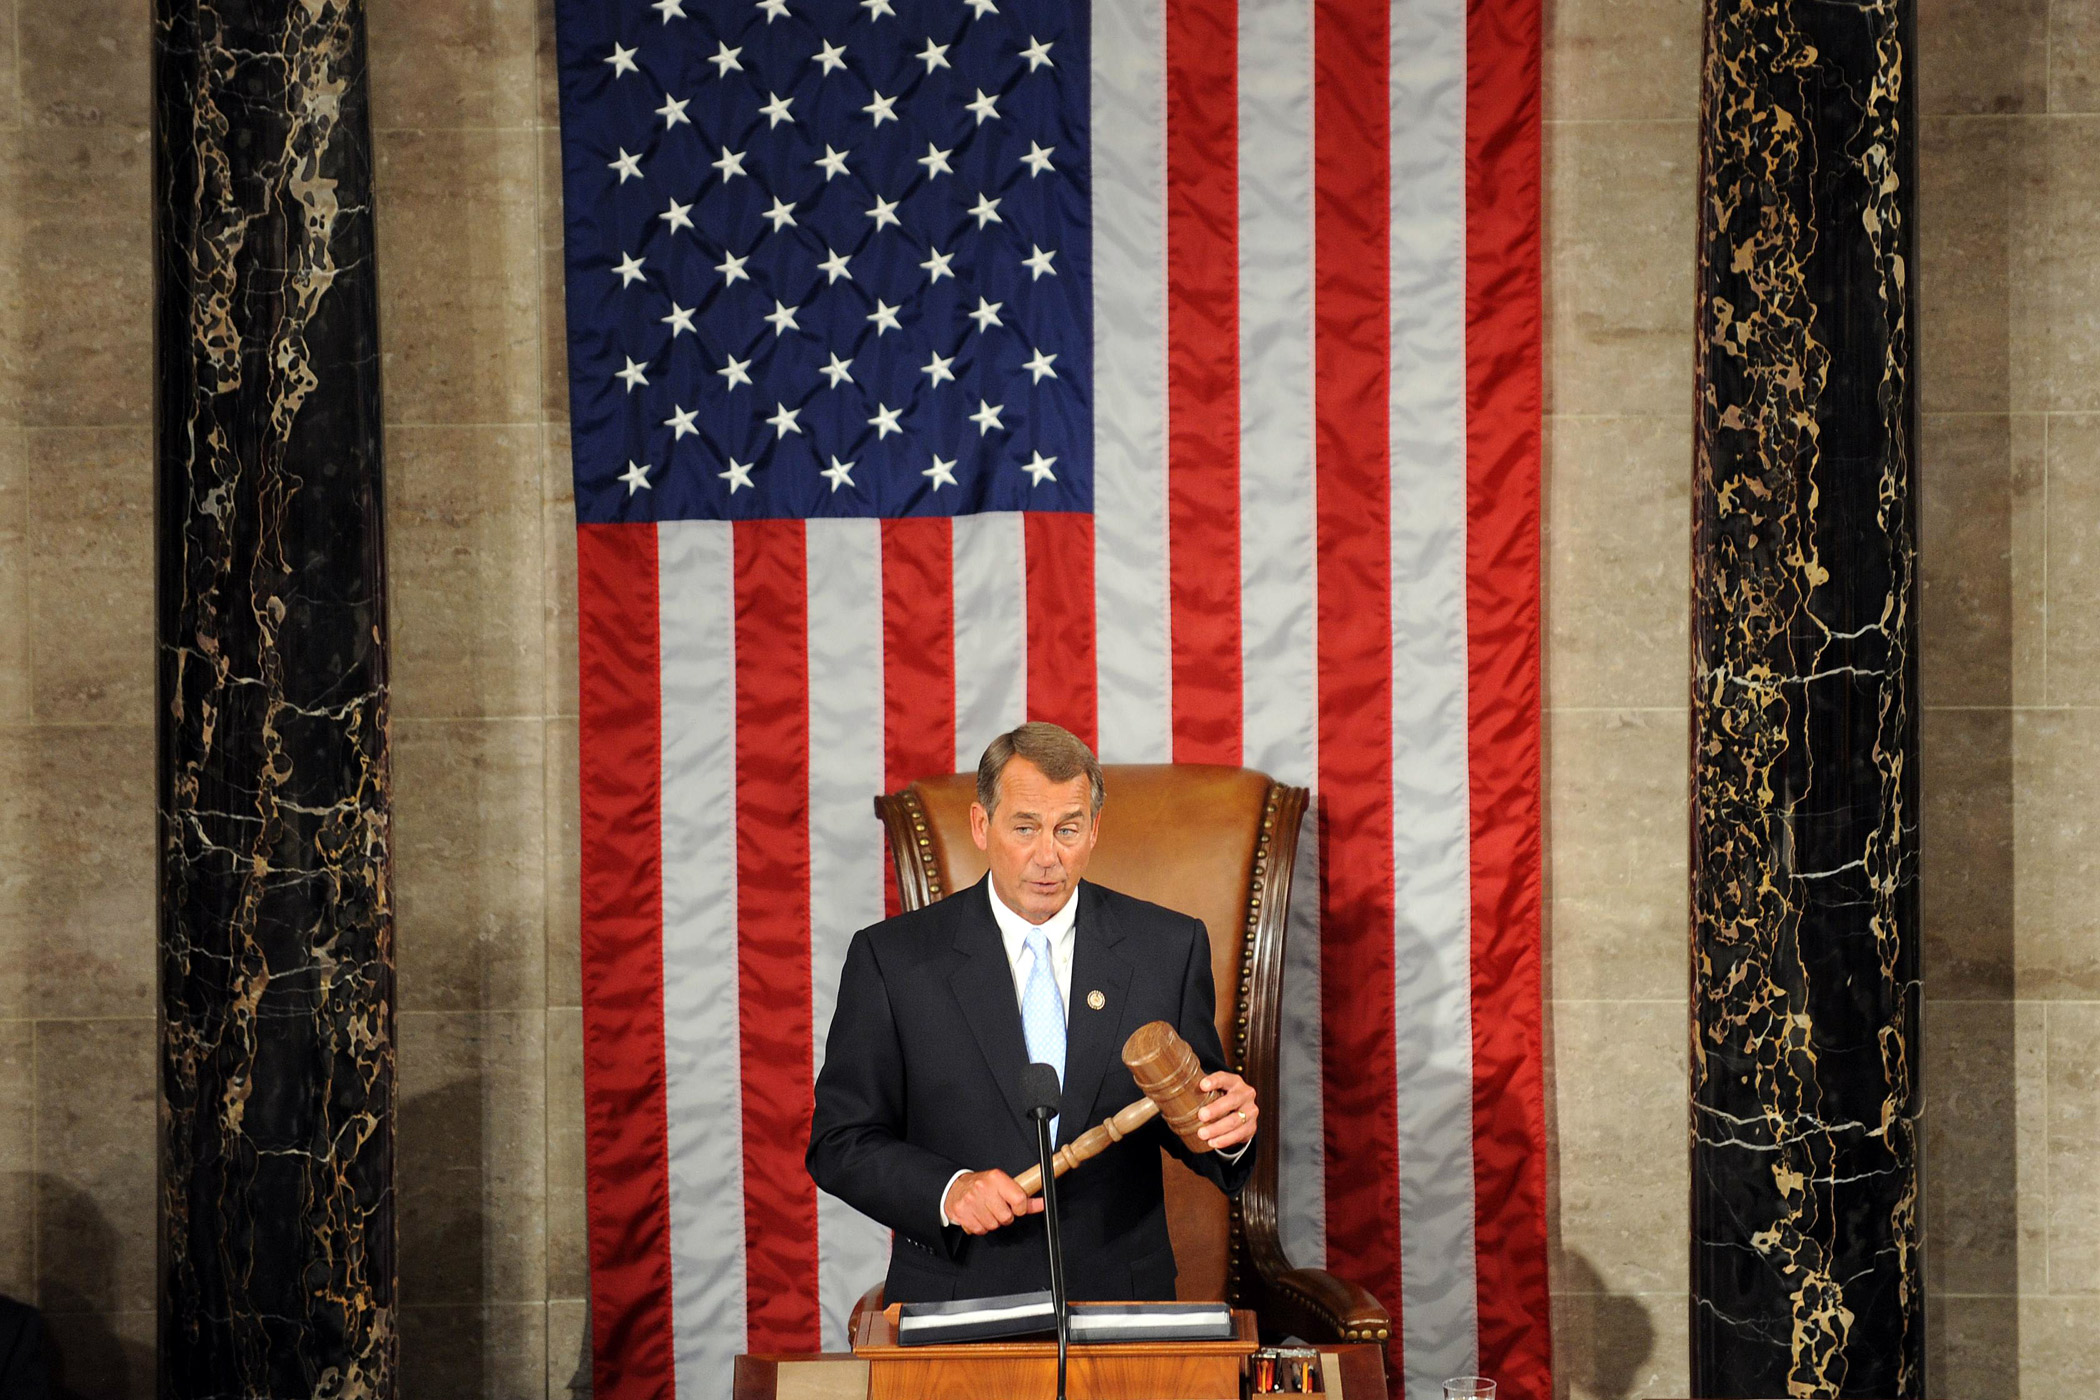 Newly elected as Speaker of the House, Boehner holds a gavel during the opening session of the 112th Congress on Capitol Hill in Washington on Jan. 5, 2011.